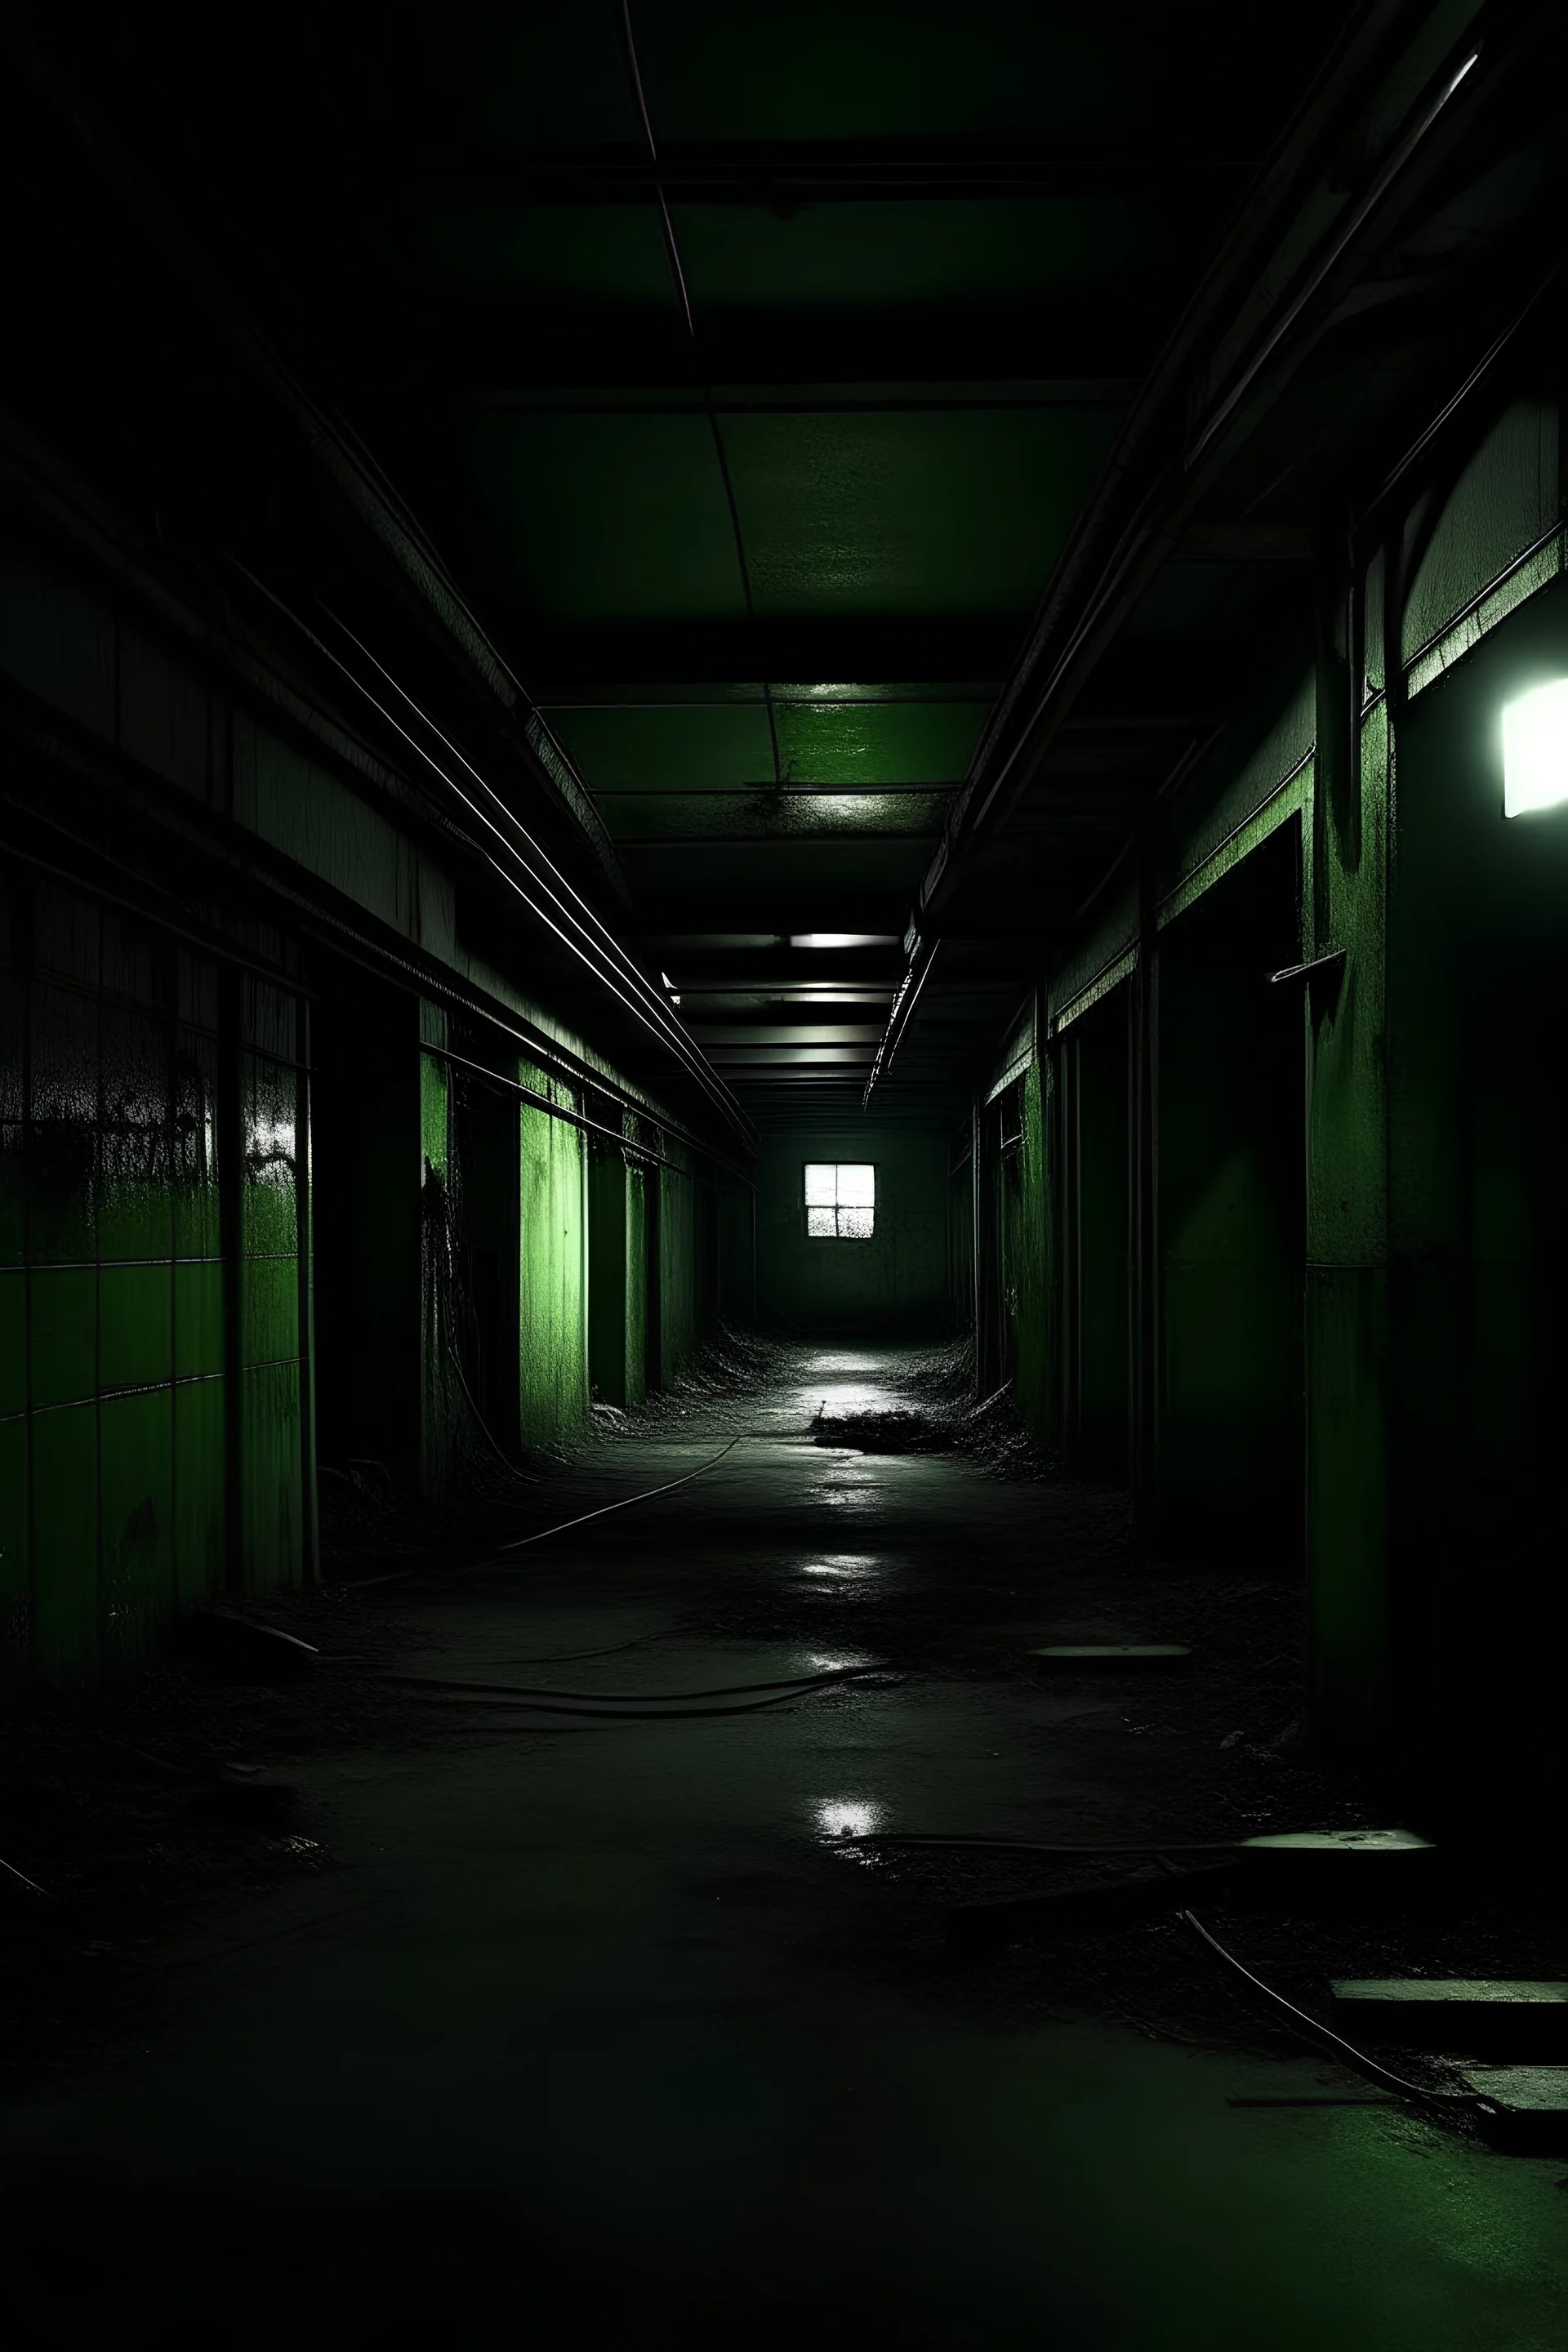 Most dark open greeny and creepy place with slow slow raning